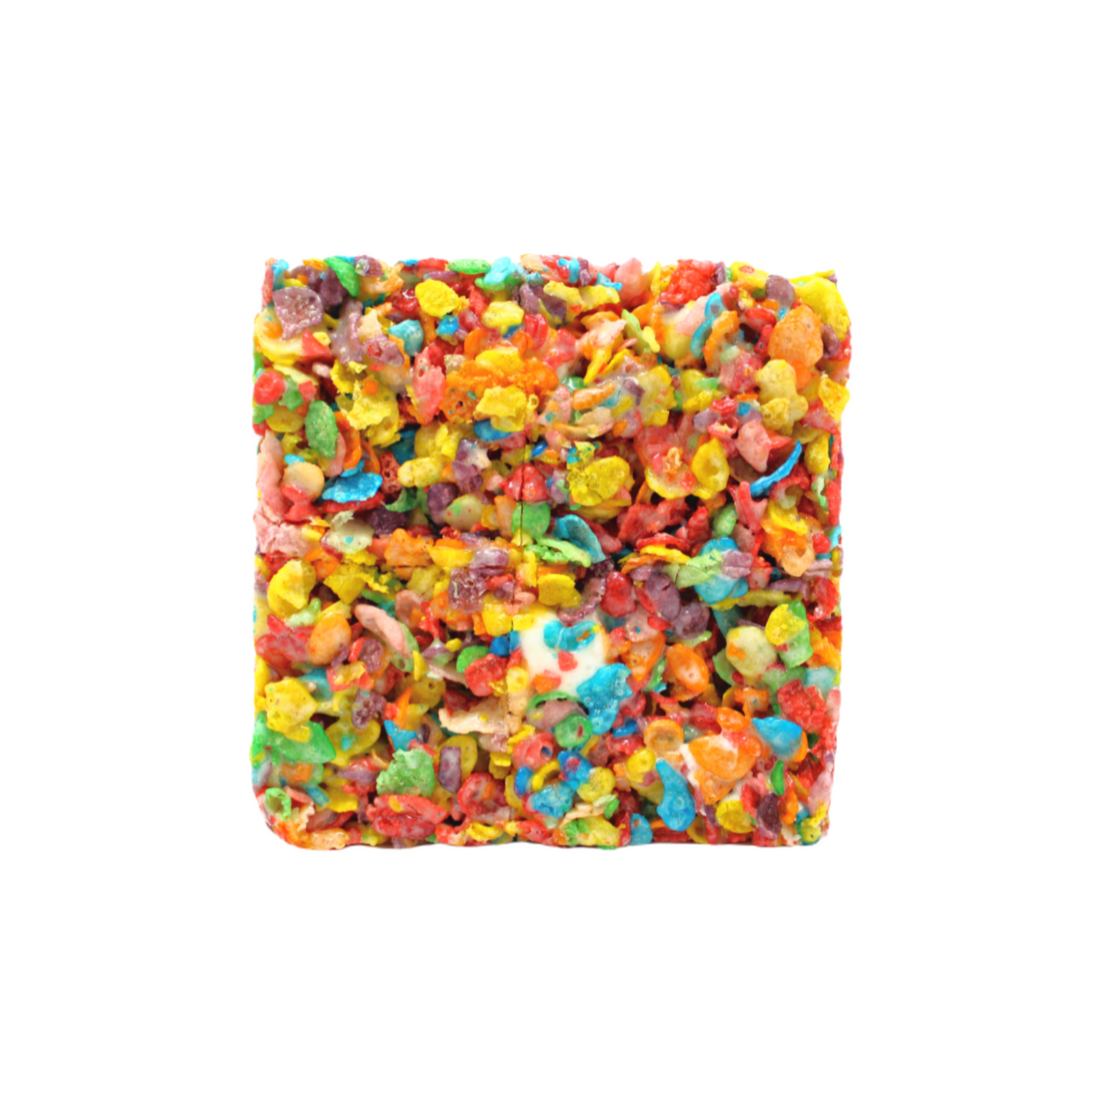 300mg Fruity Cereal Treat - Sherpa THC